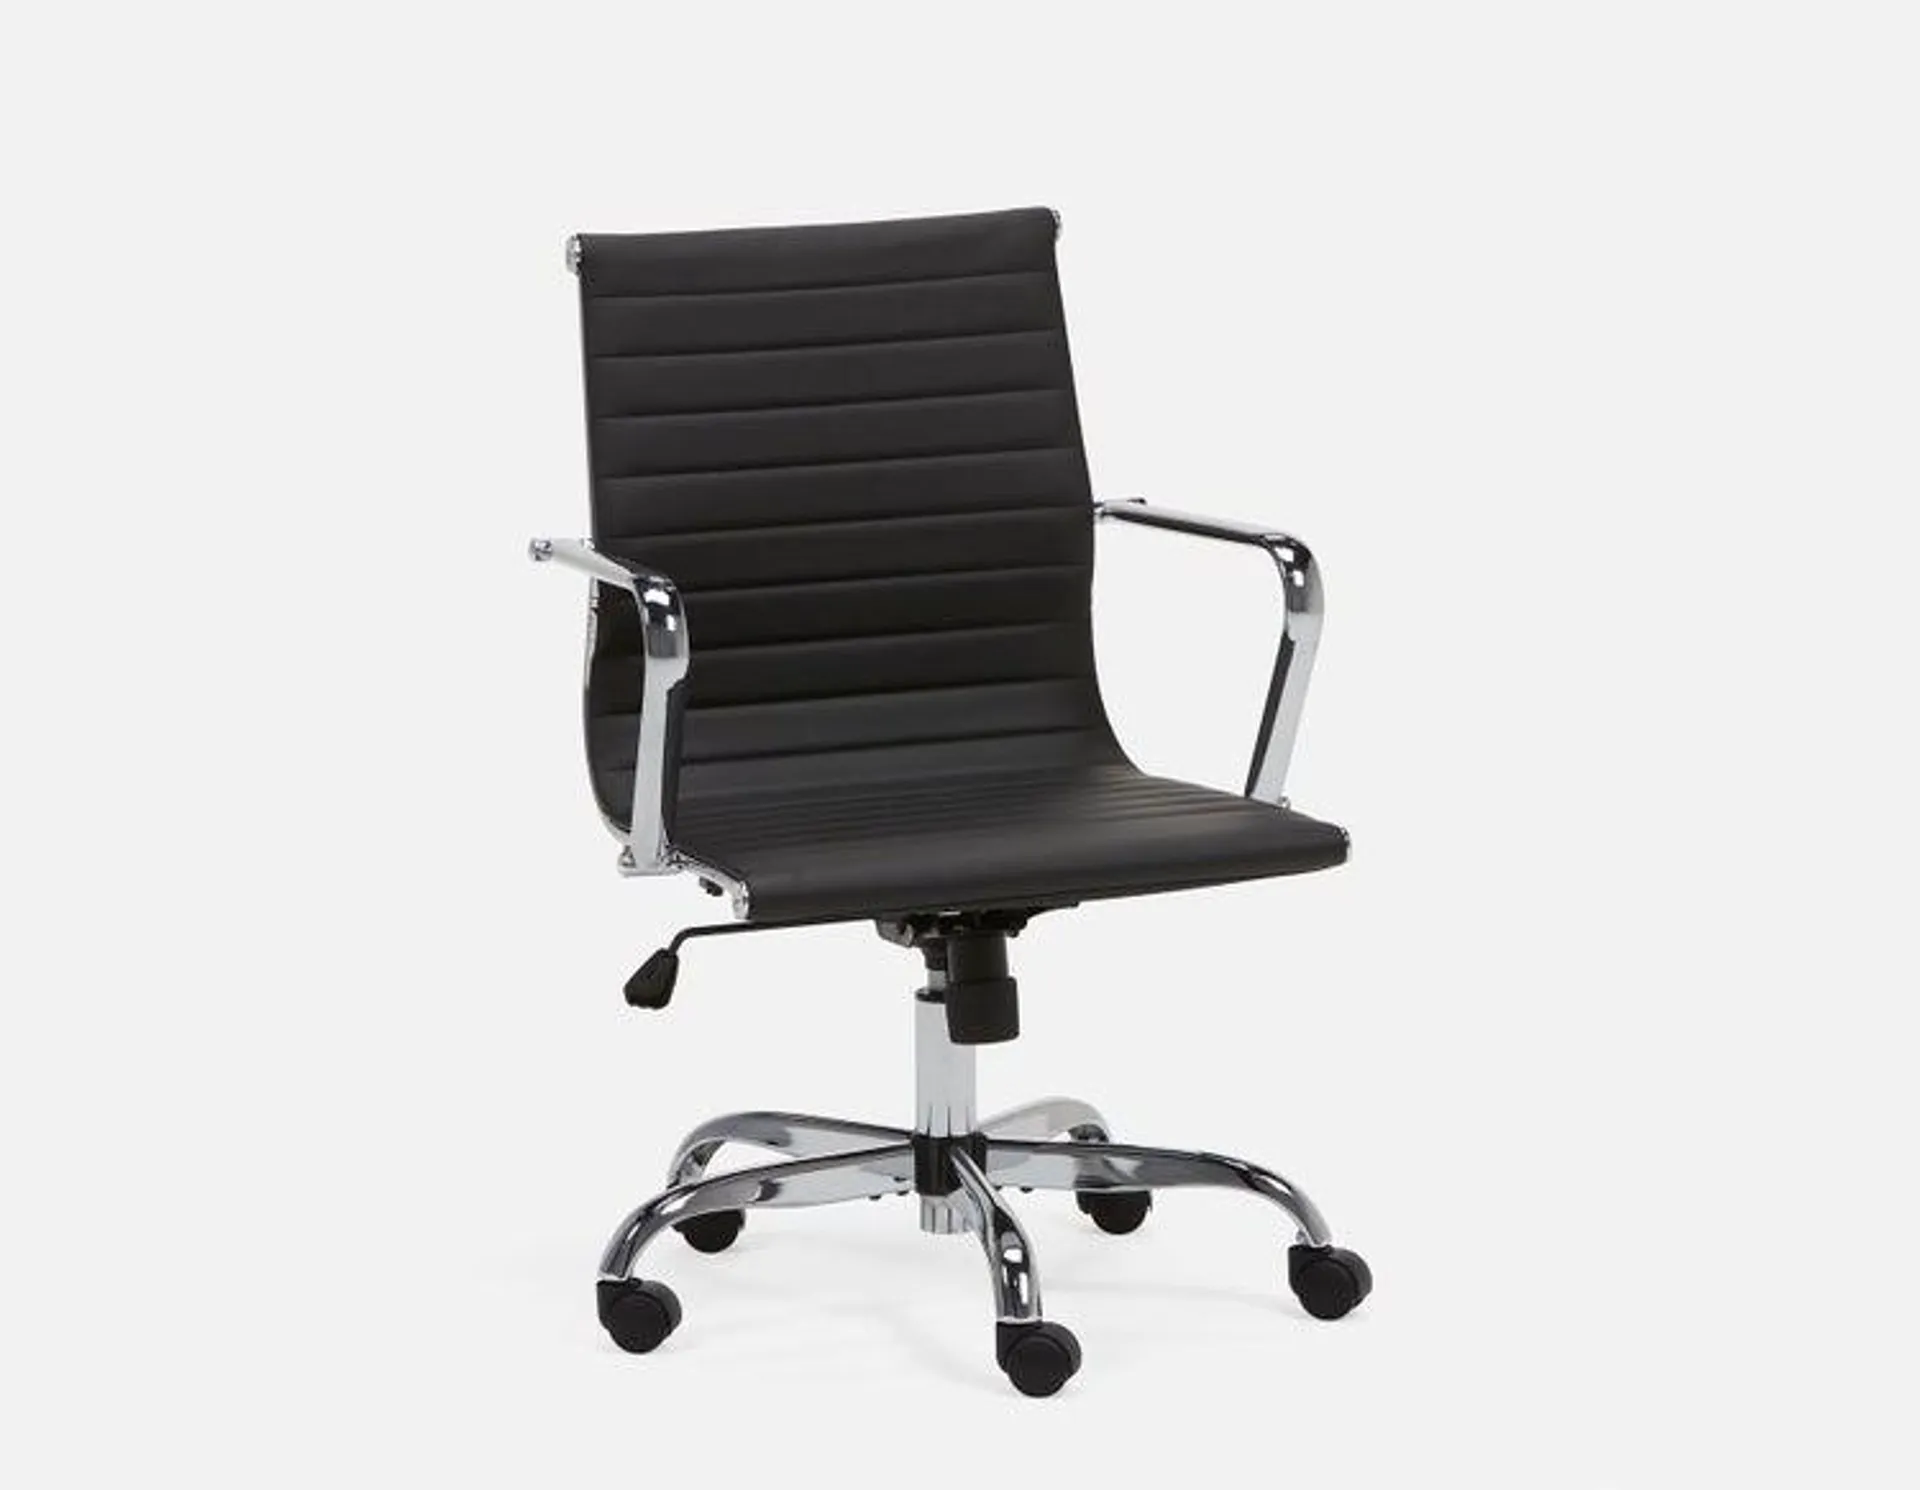 SPENCE office chair